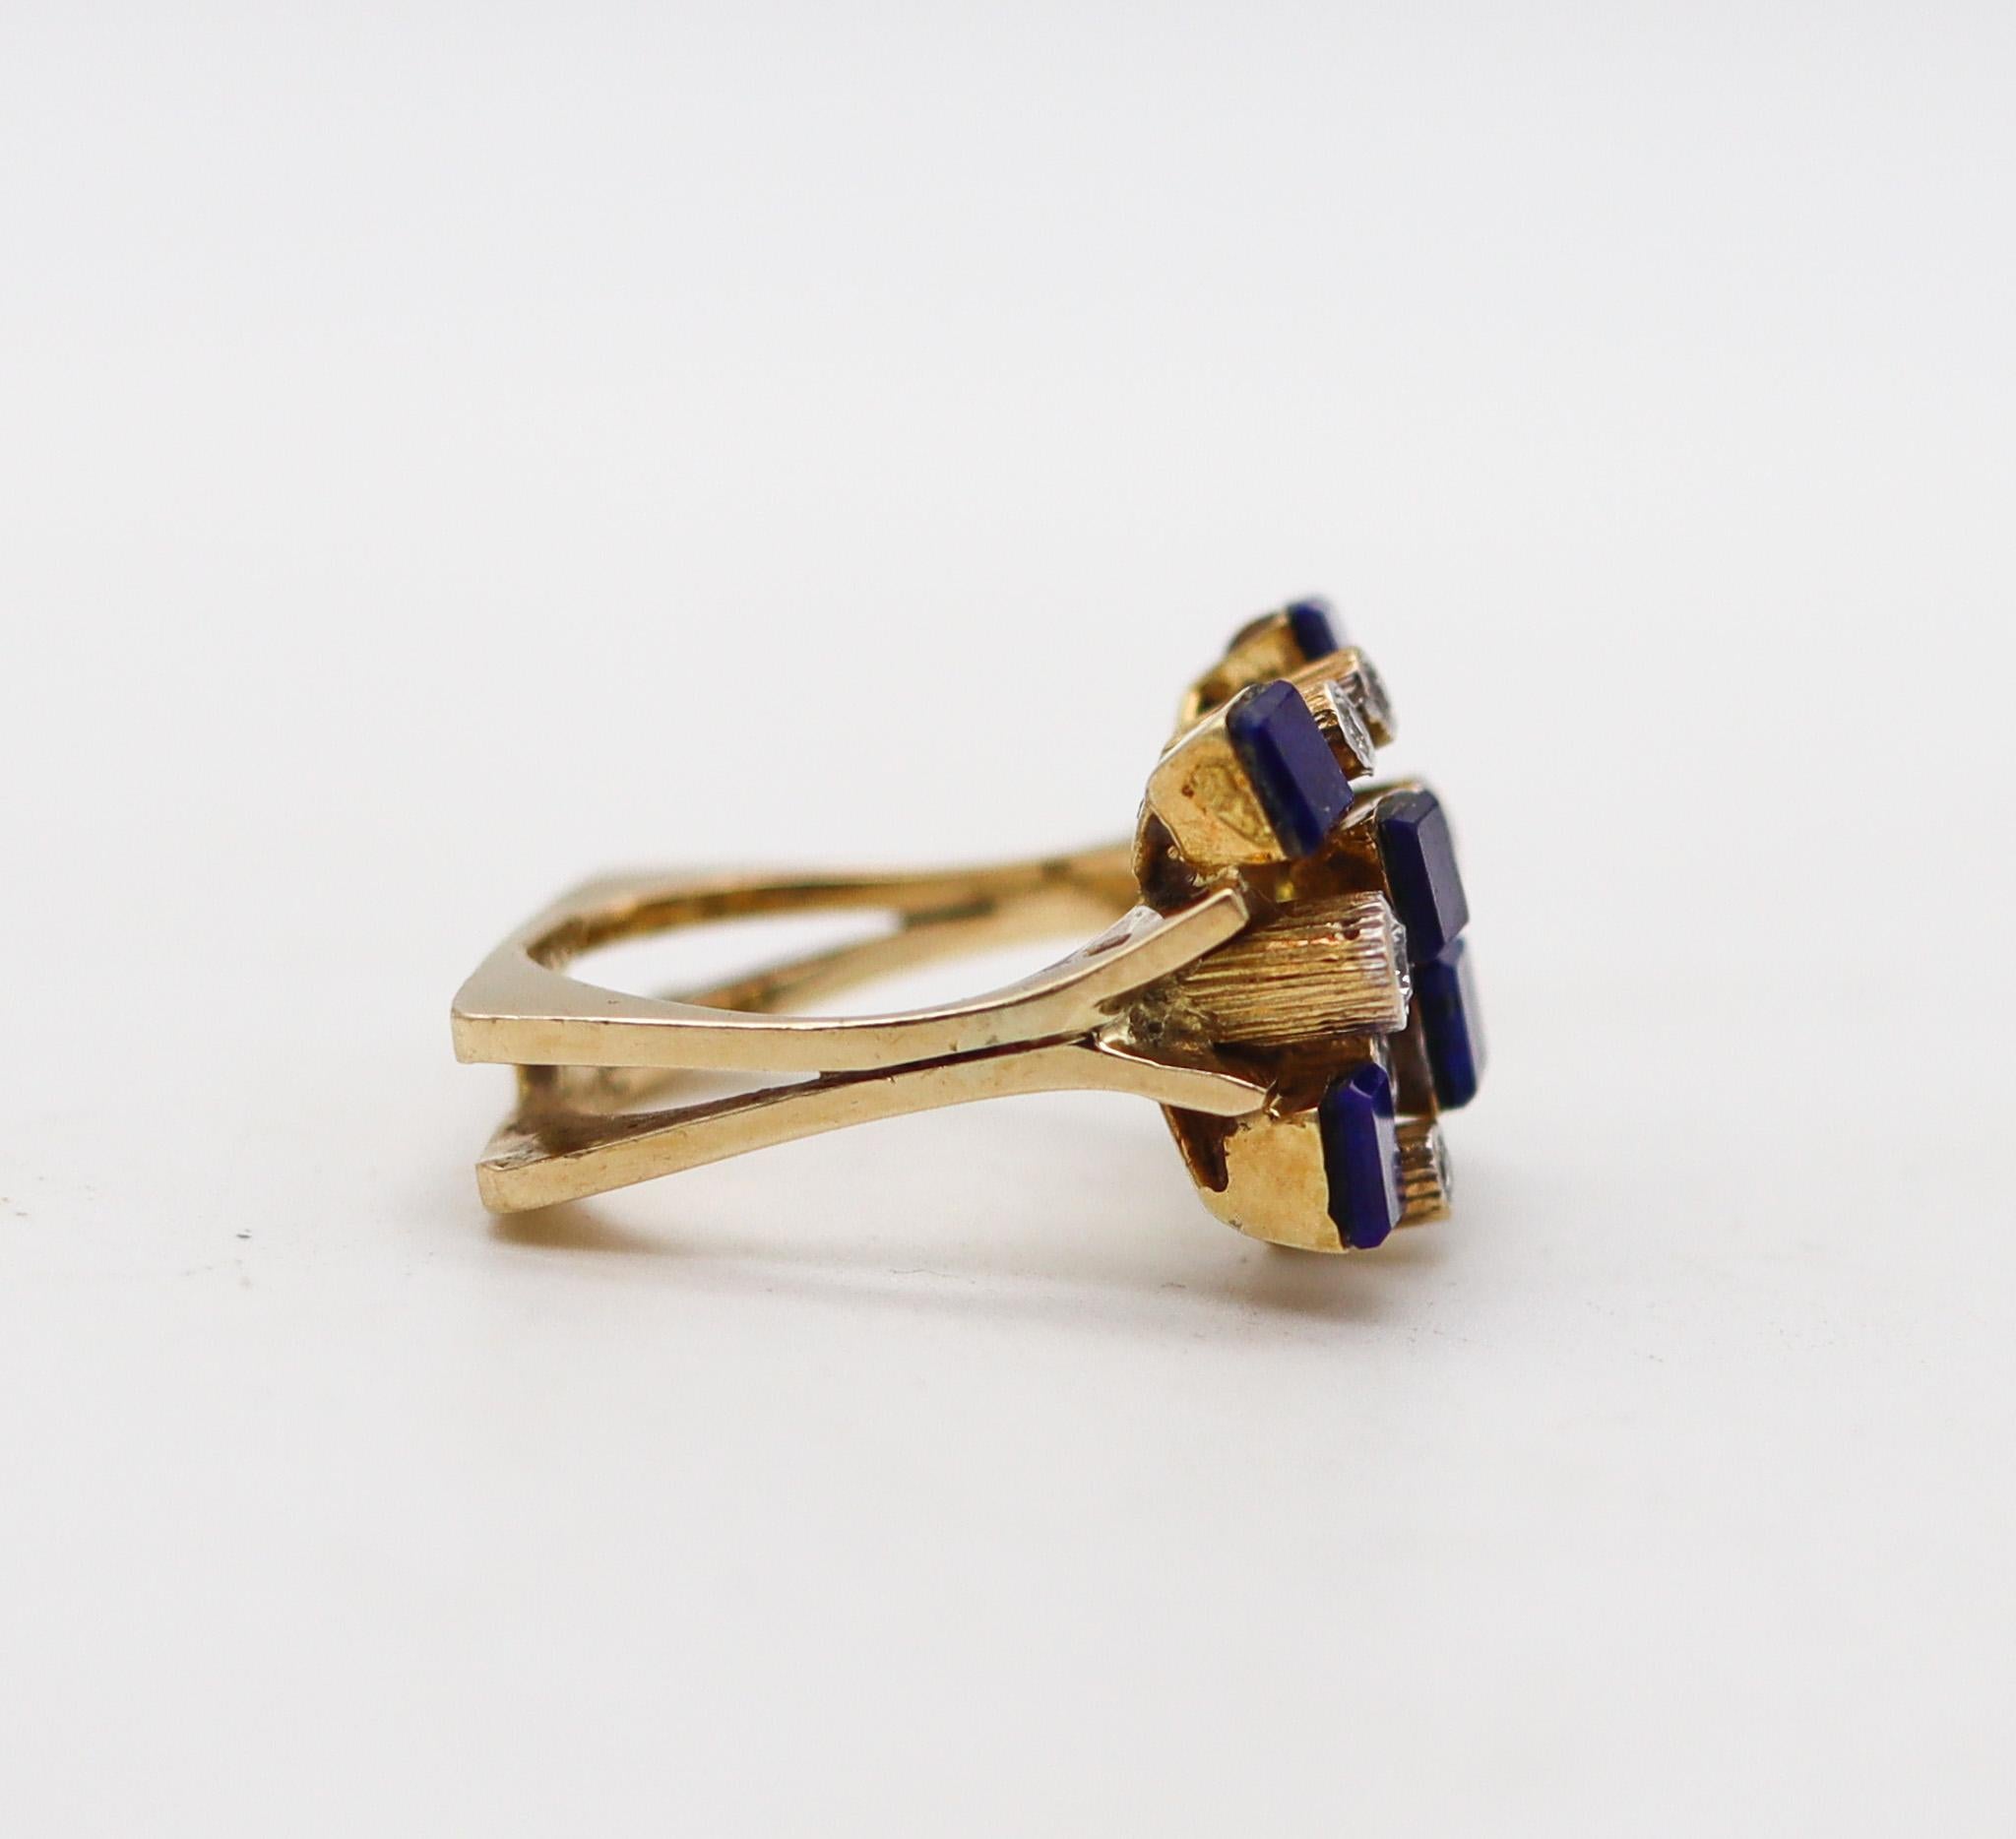 Modernist Danish 1970 Geometric Ring In 14Kt Yellow Gold With Diamonds And Lapis Lazuli For Sale